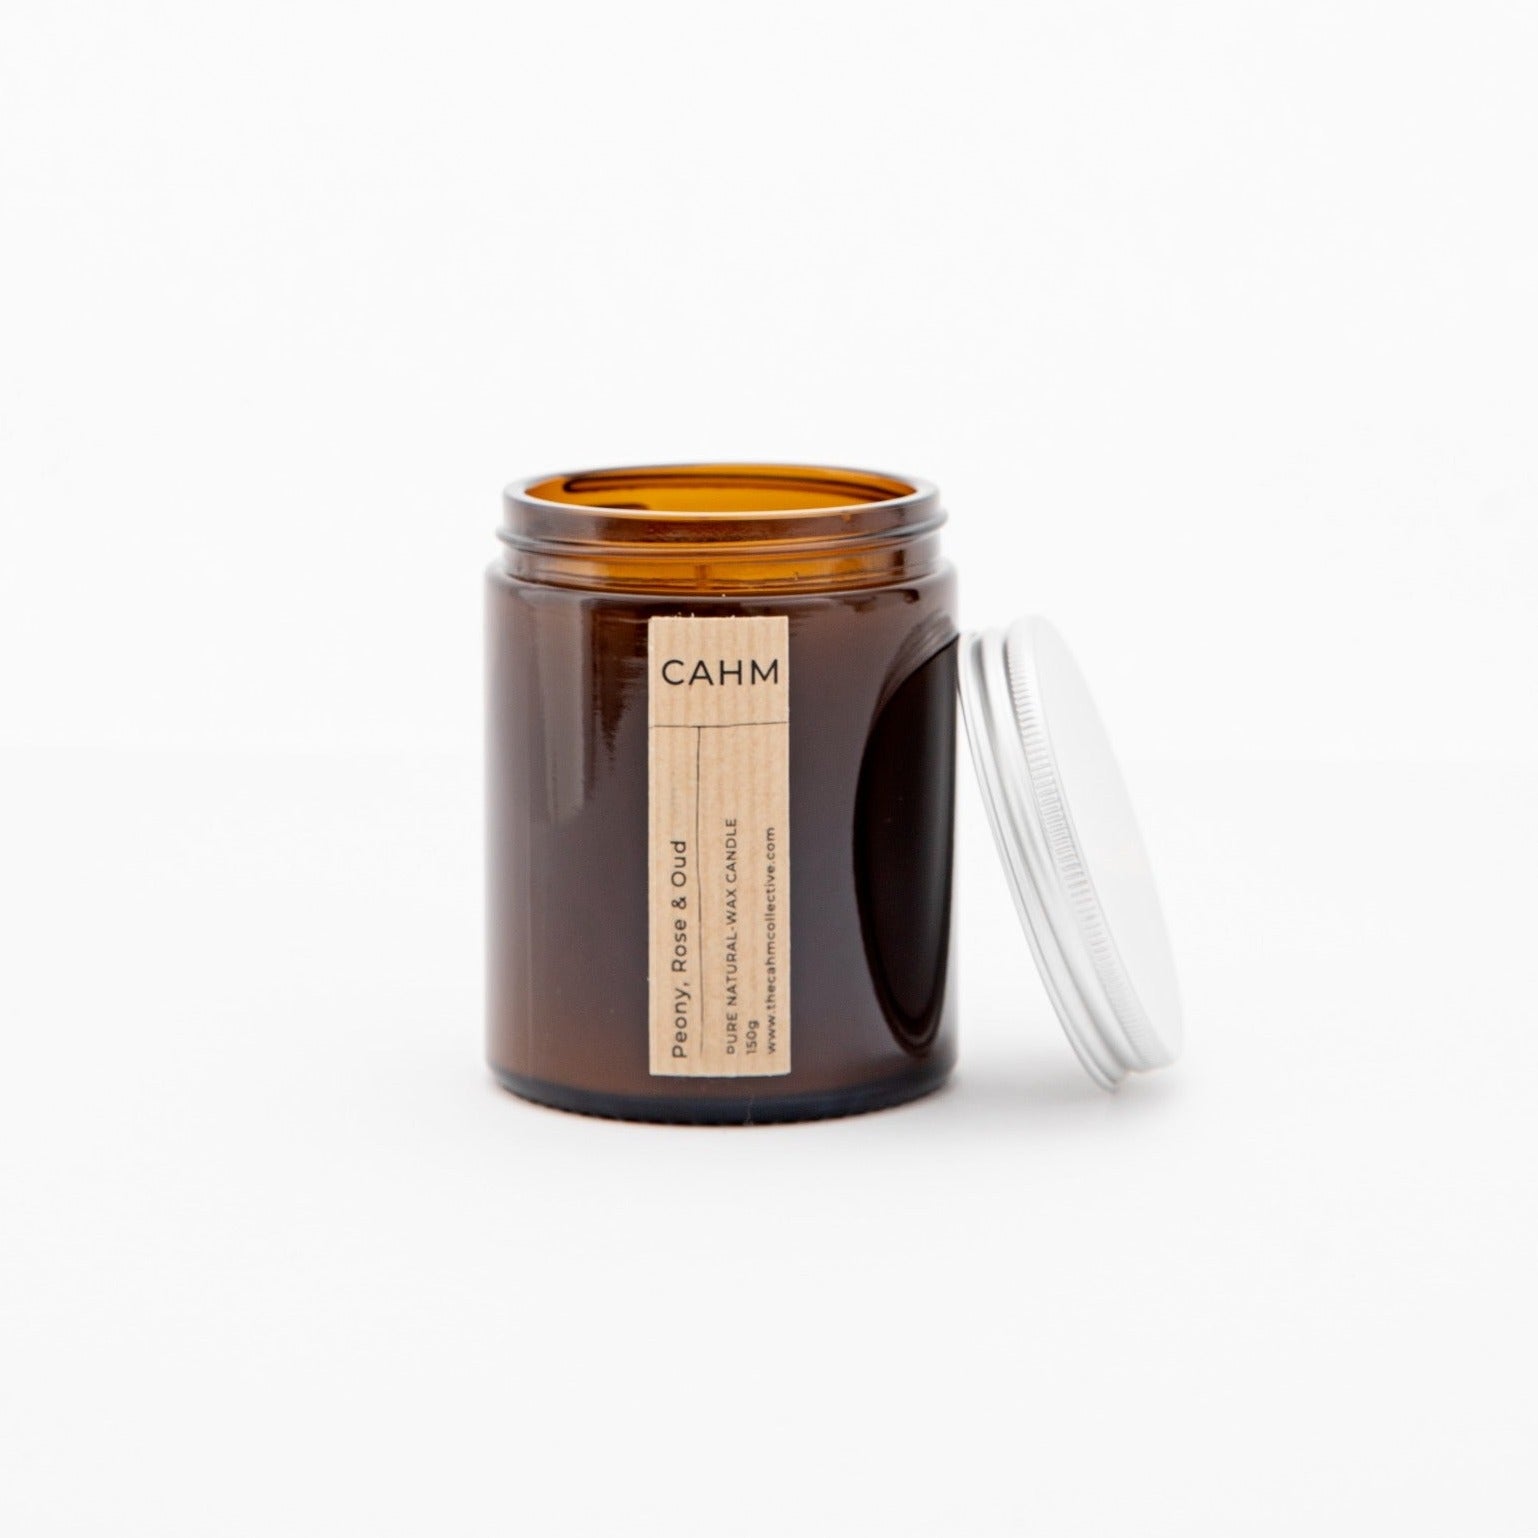 CAHM Peony, Rose & Oud Amber Jar Candle